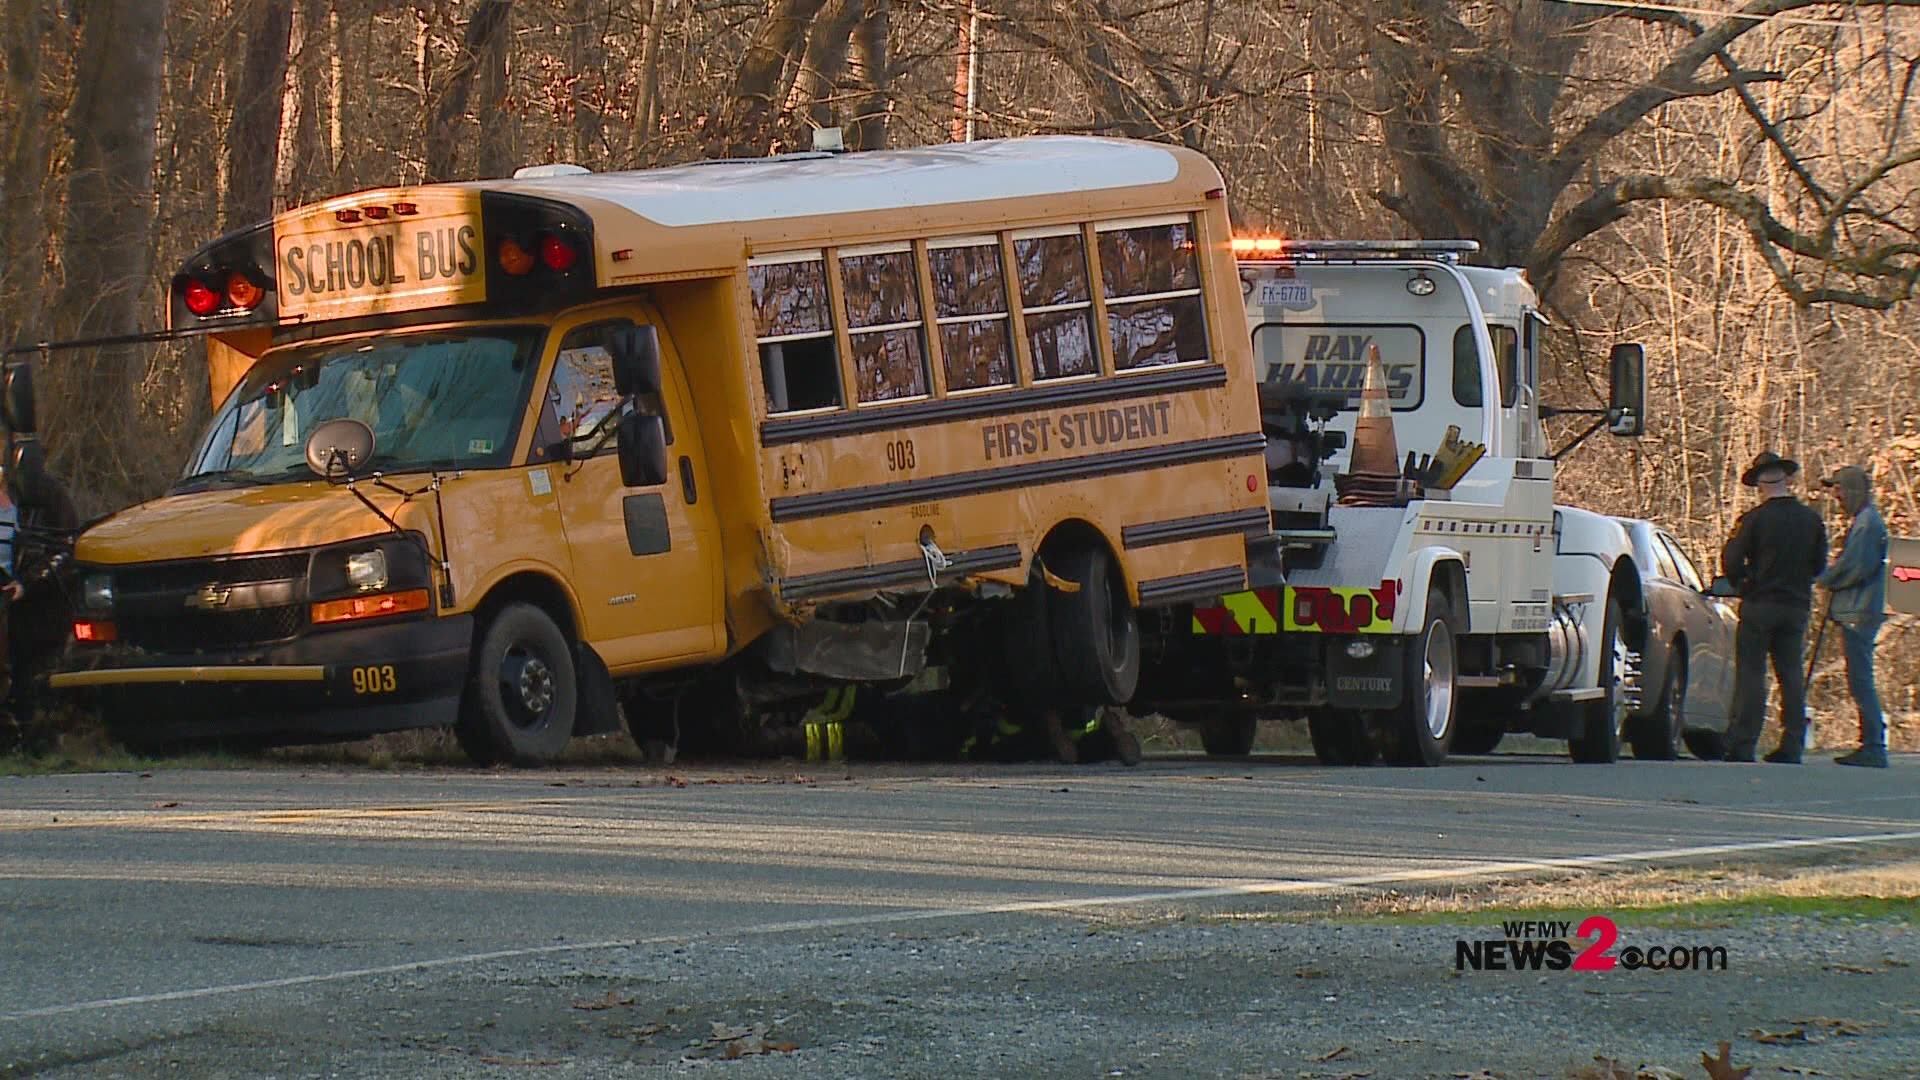 Troopers say three students were taken to the hospital with minor injuries.